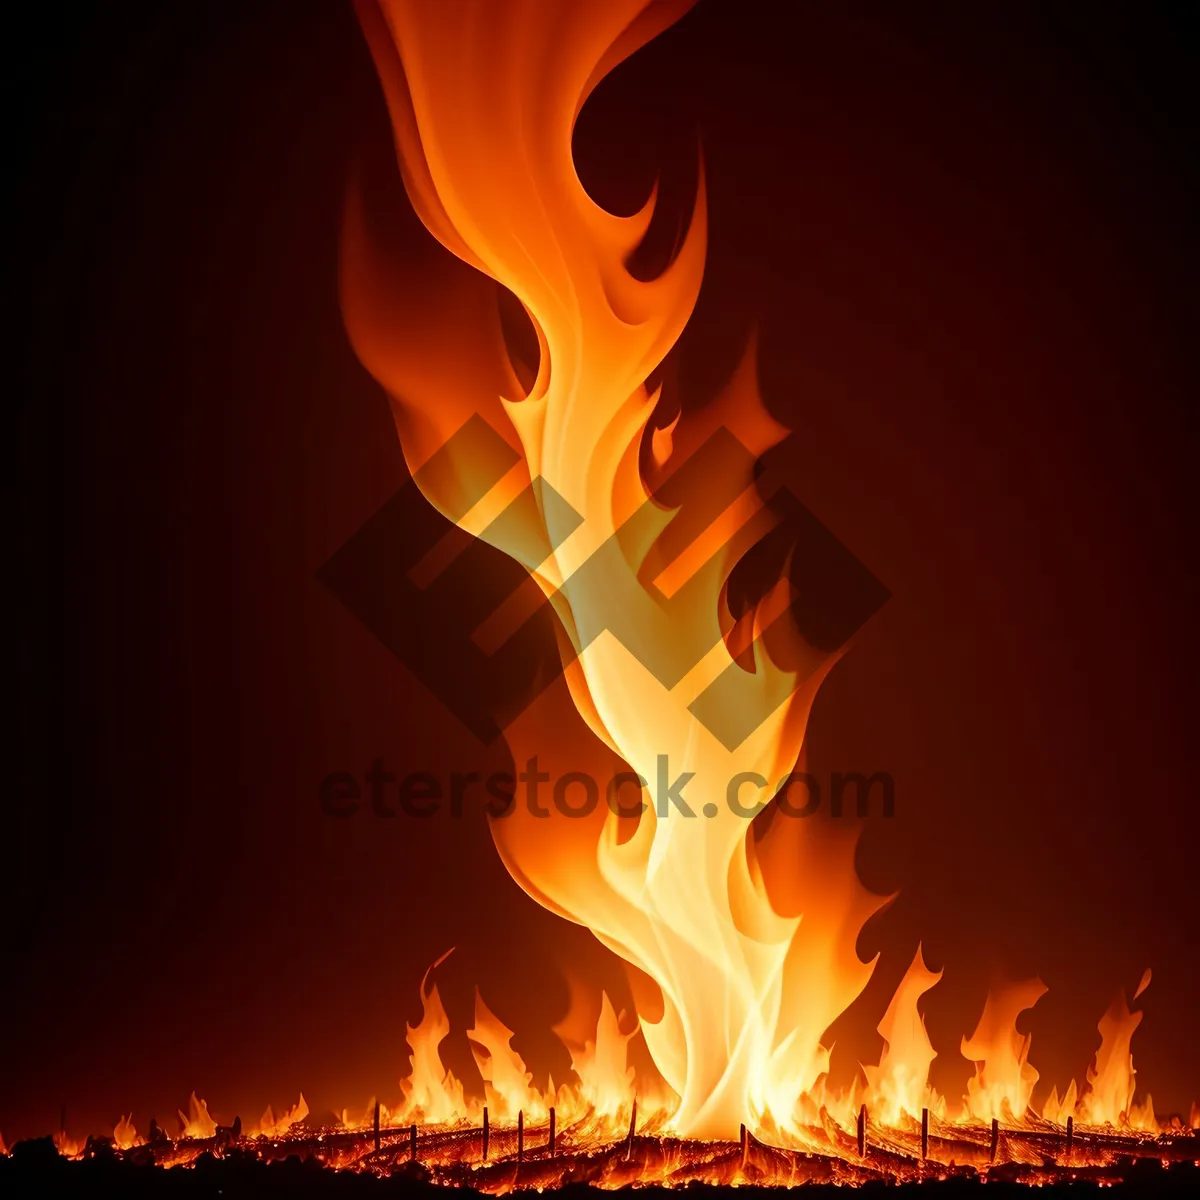 Picture of Fiery Inferno: Blazing Flames Ignite Heat